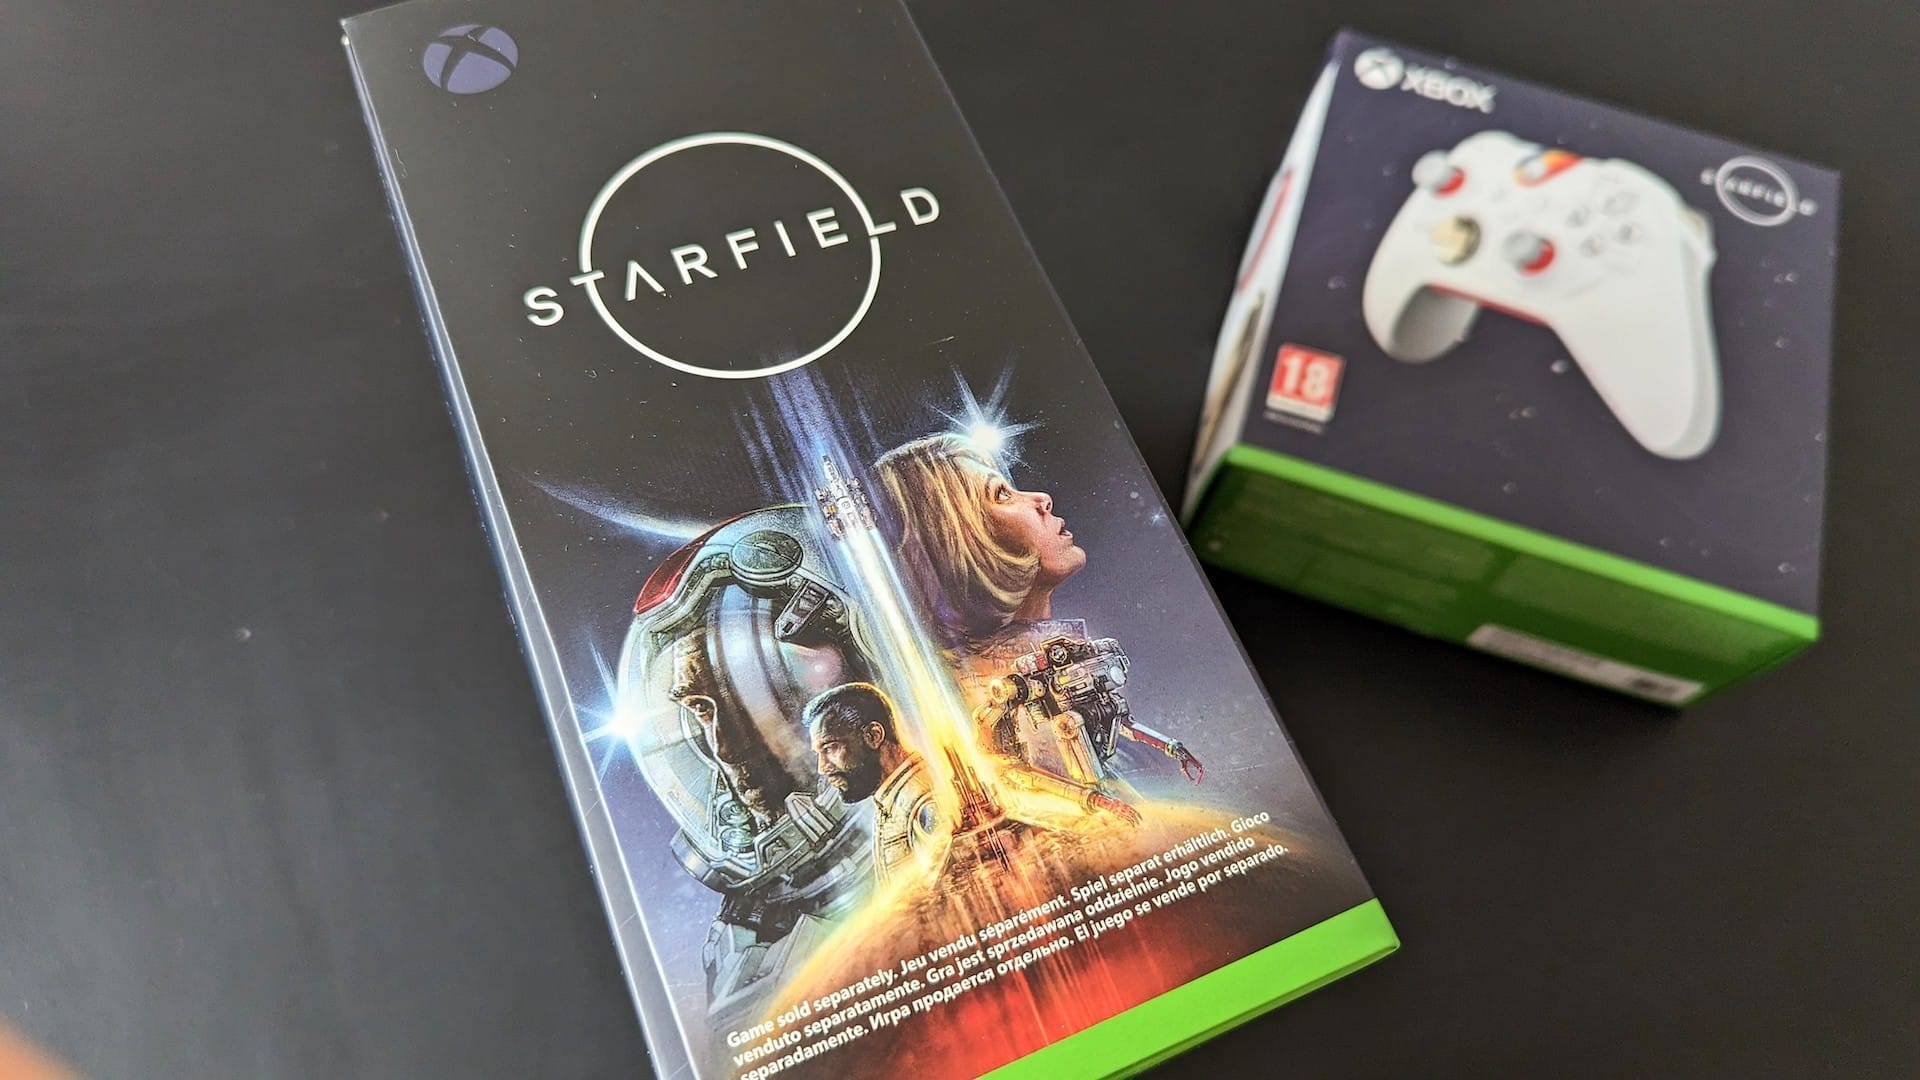 Unboxing Manette Starfield Xbox Collector Casque